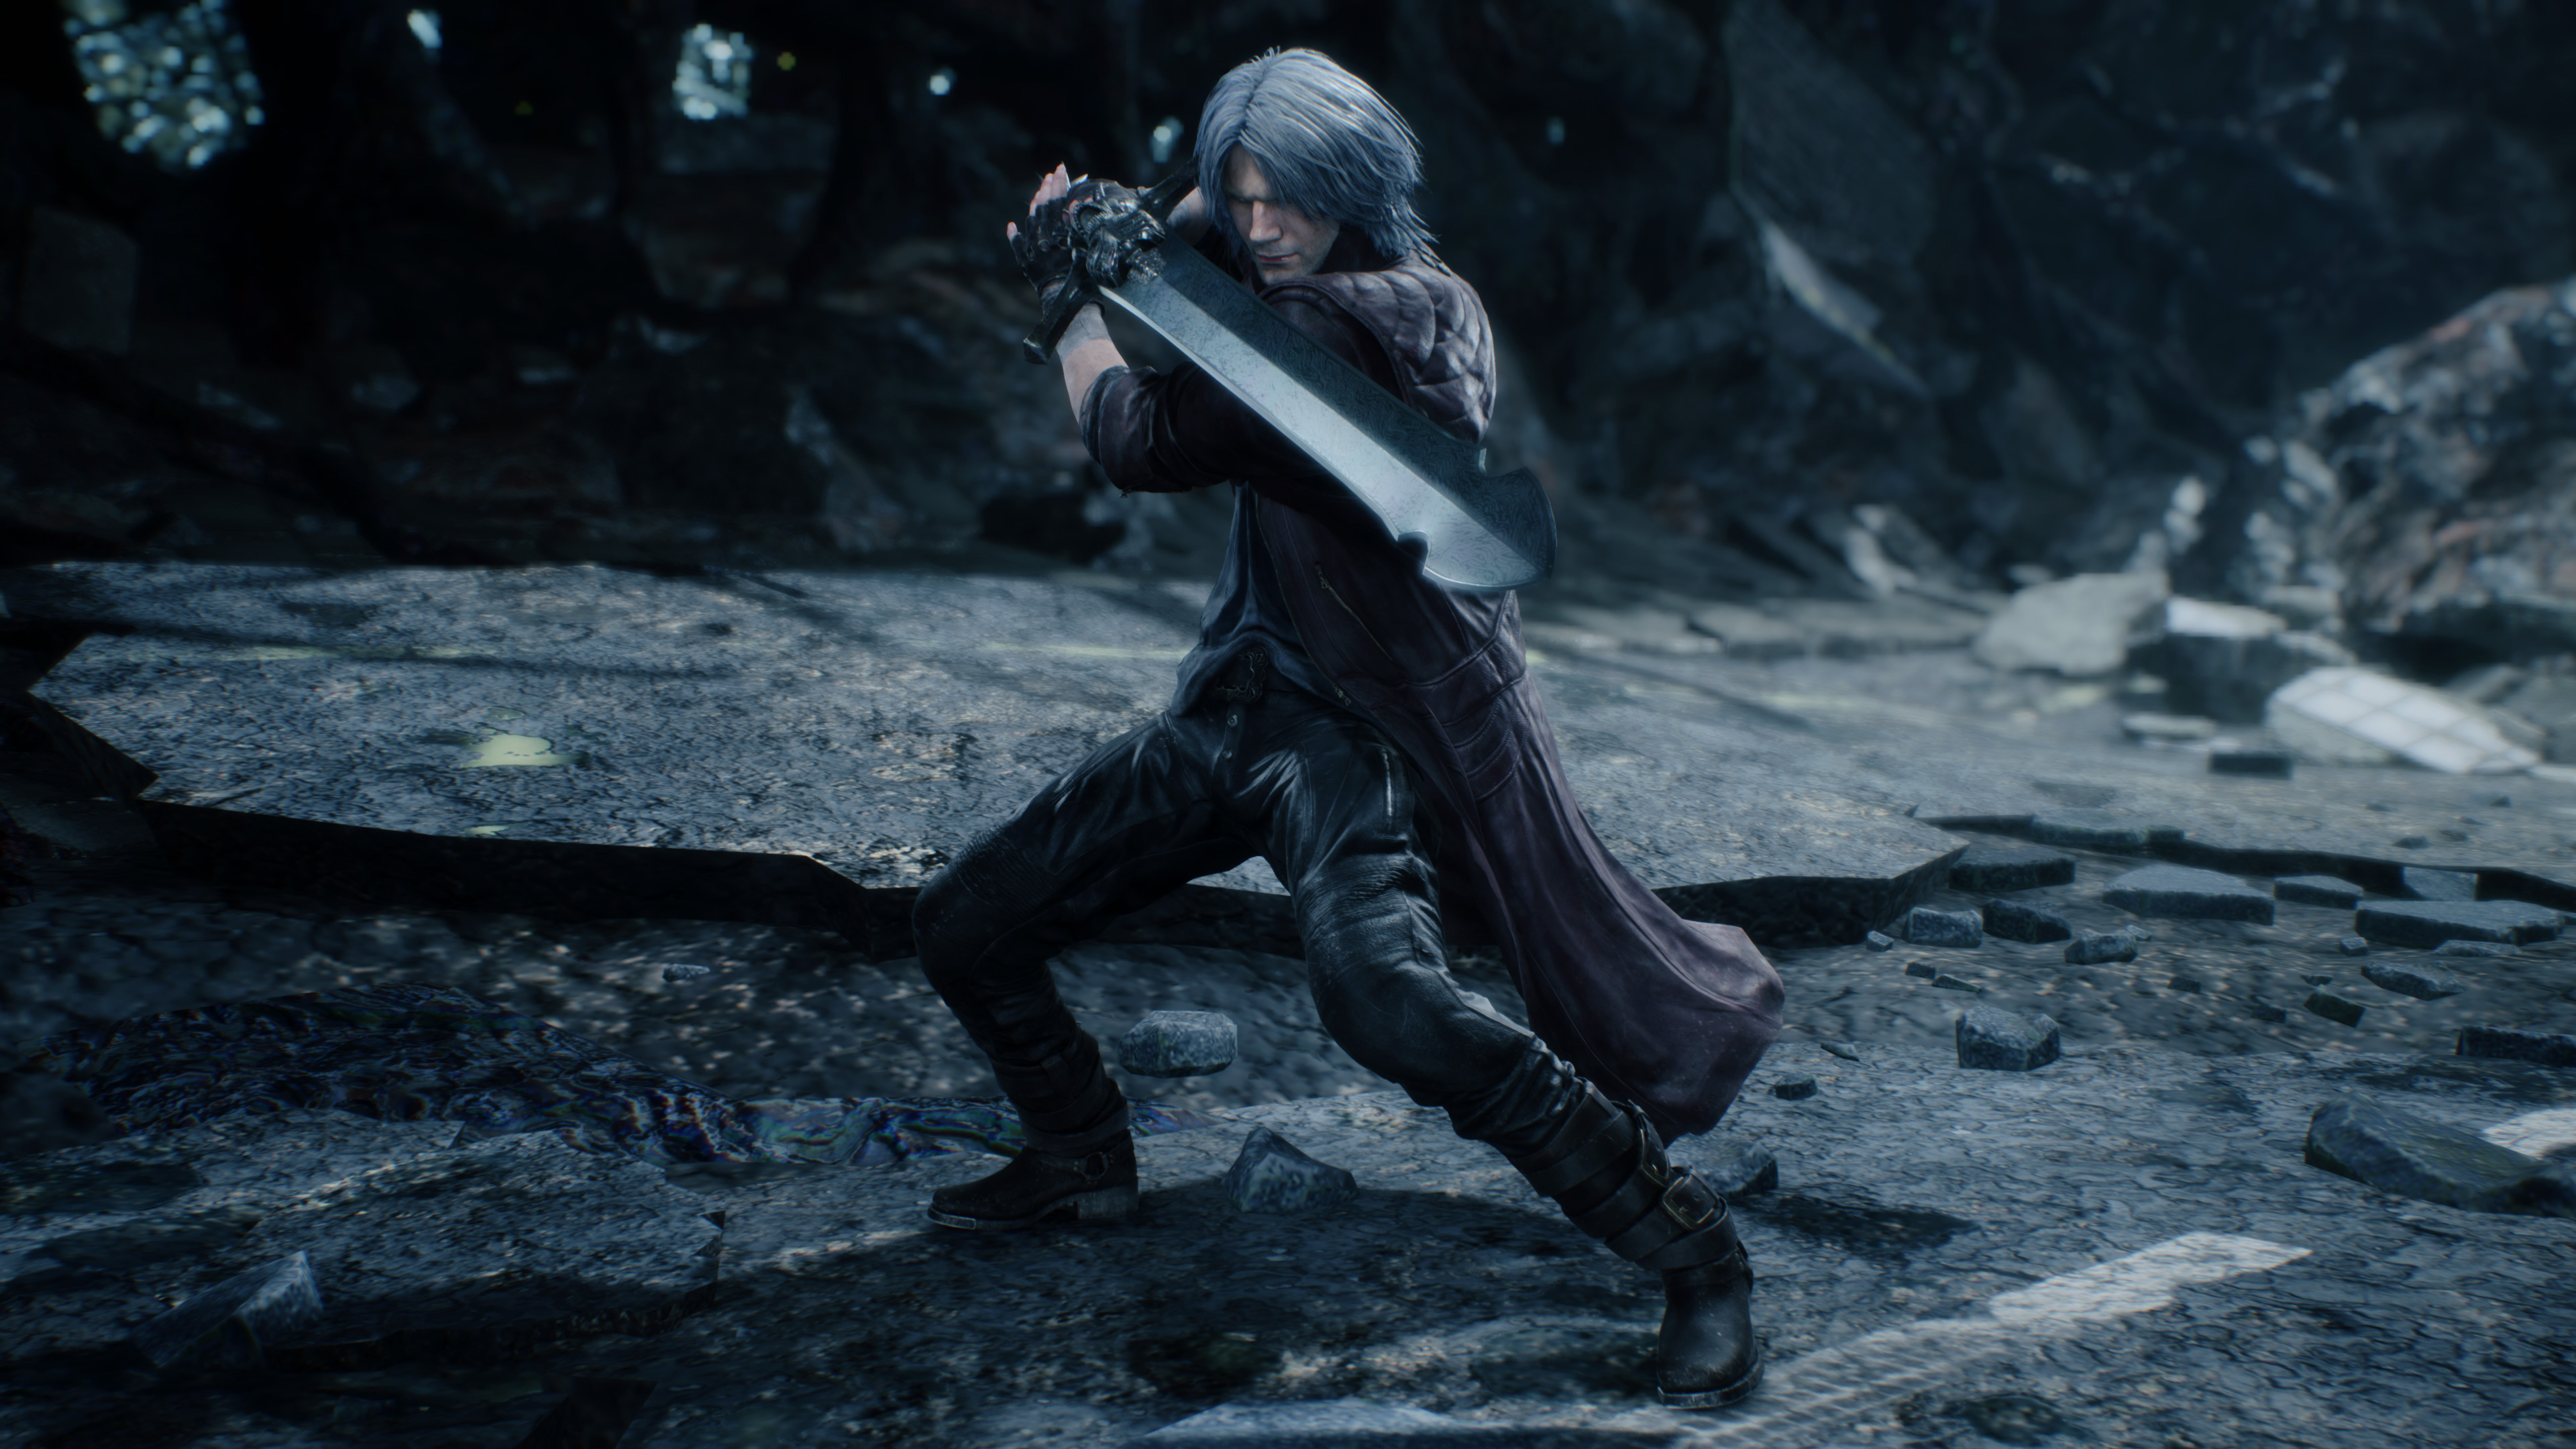 Devil May Cry 5 Wallpapers In Ultra Hd 4k Gameranx